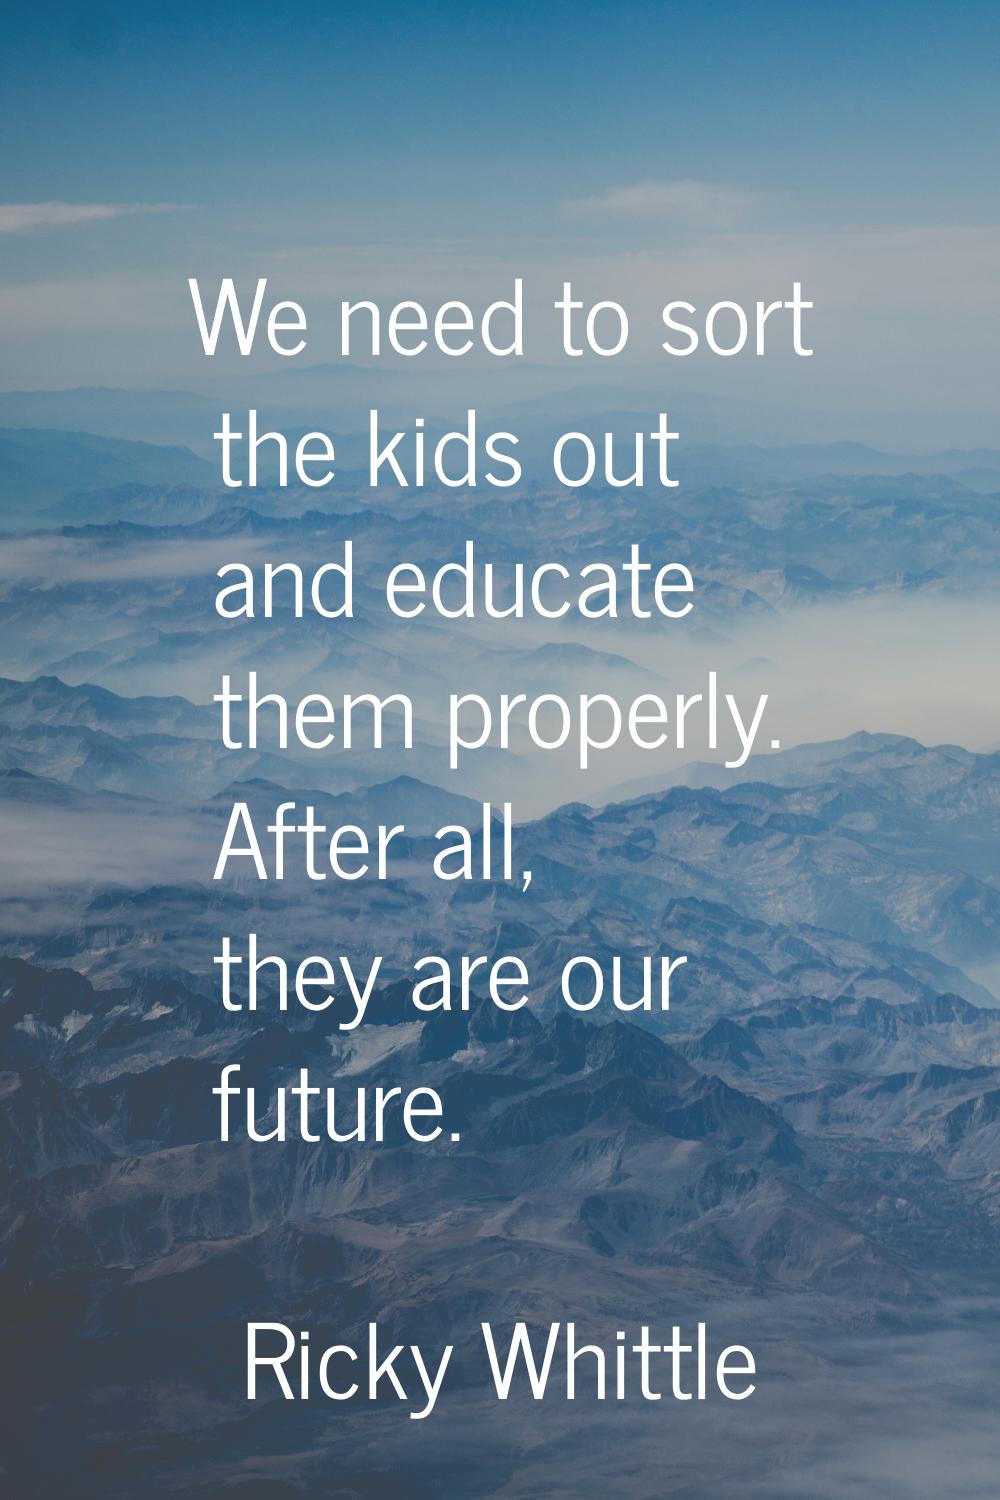 We need to sort the kids out and educate them properly. After all, they are our future.